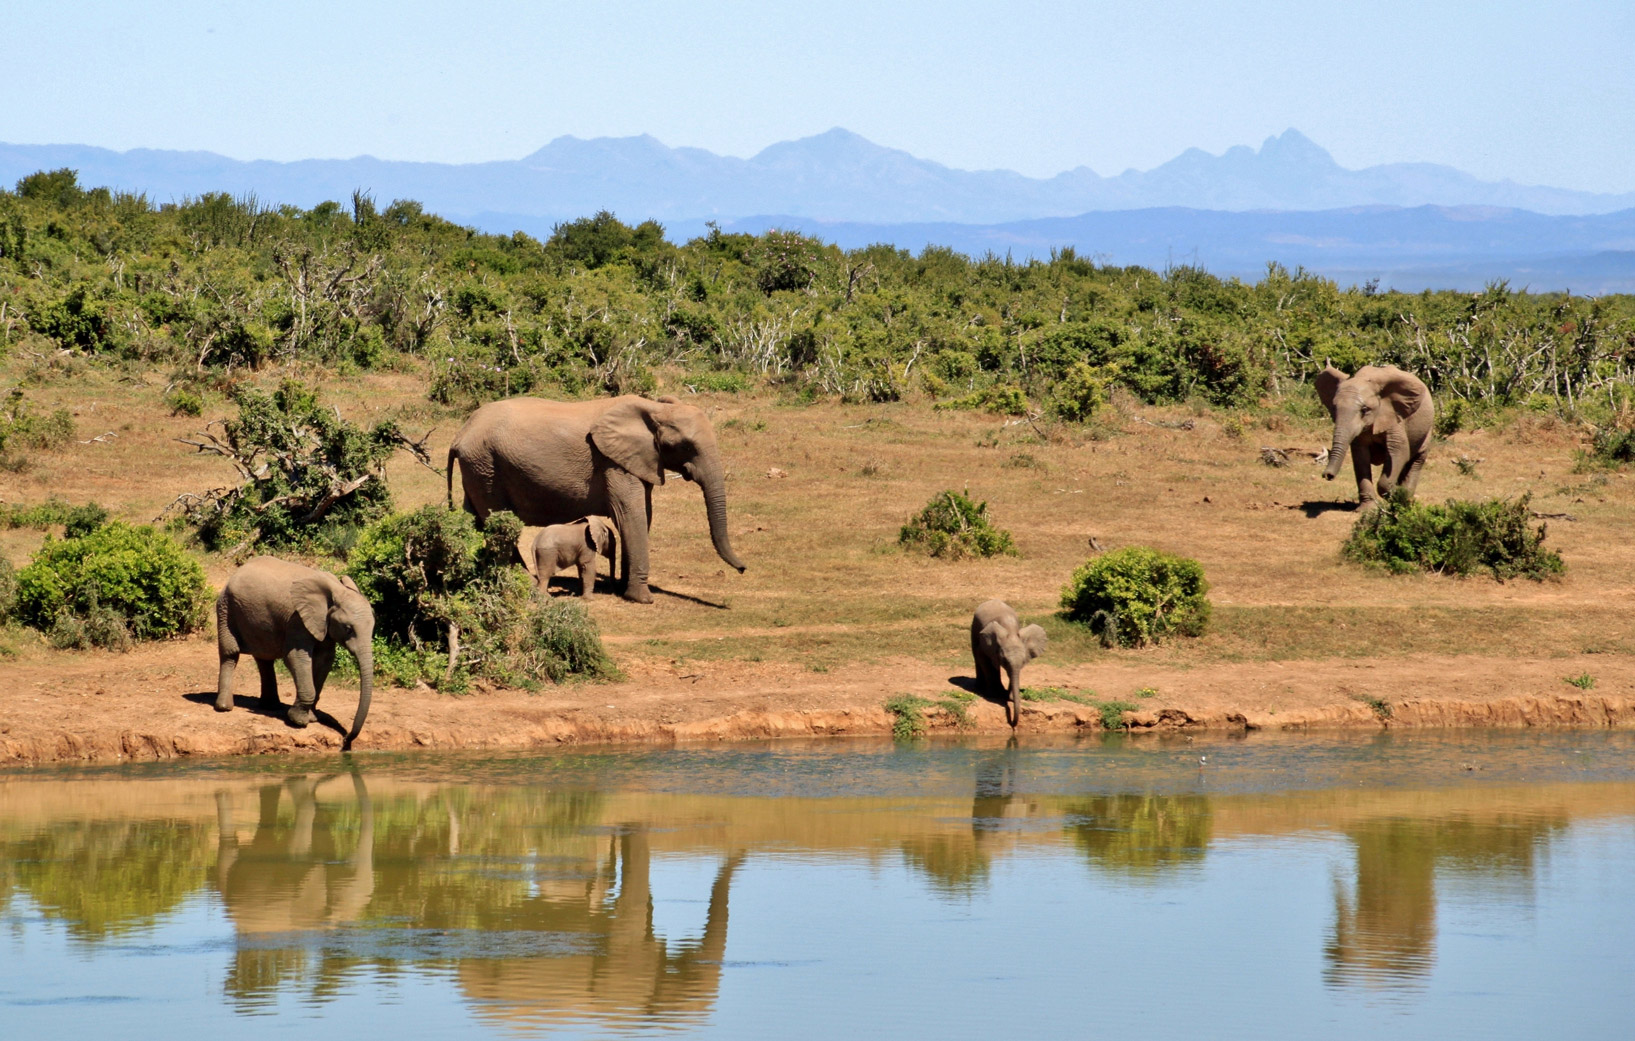 elephants in africa gathering around a water source